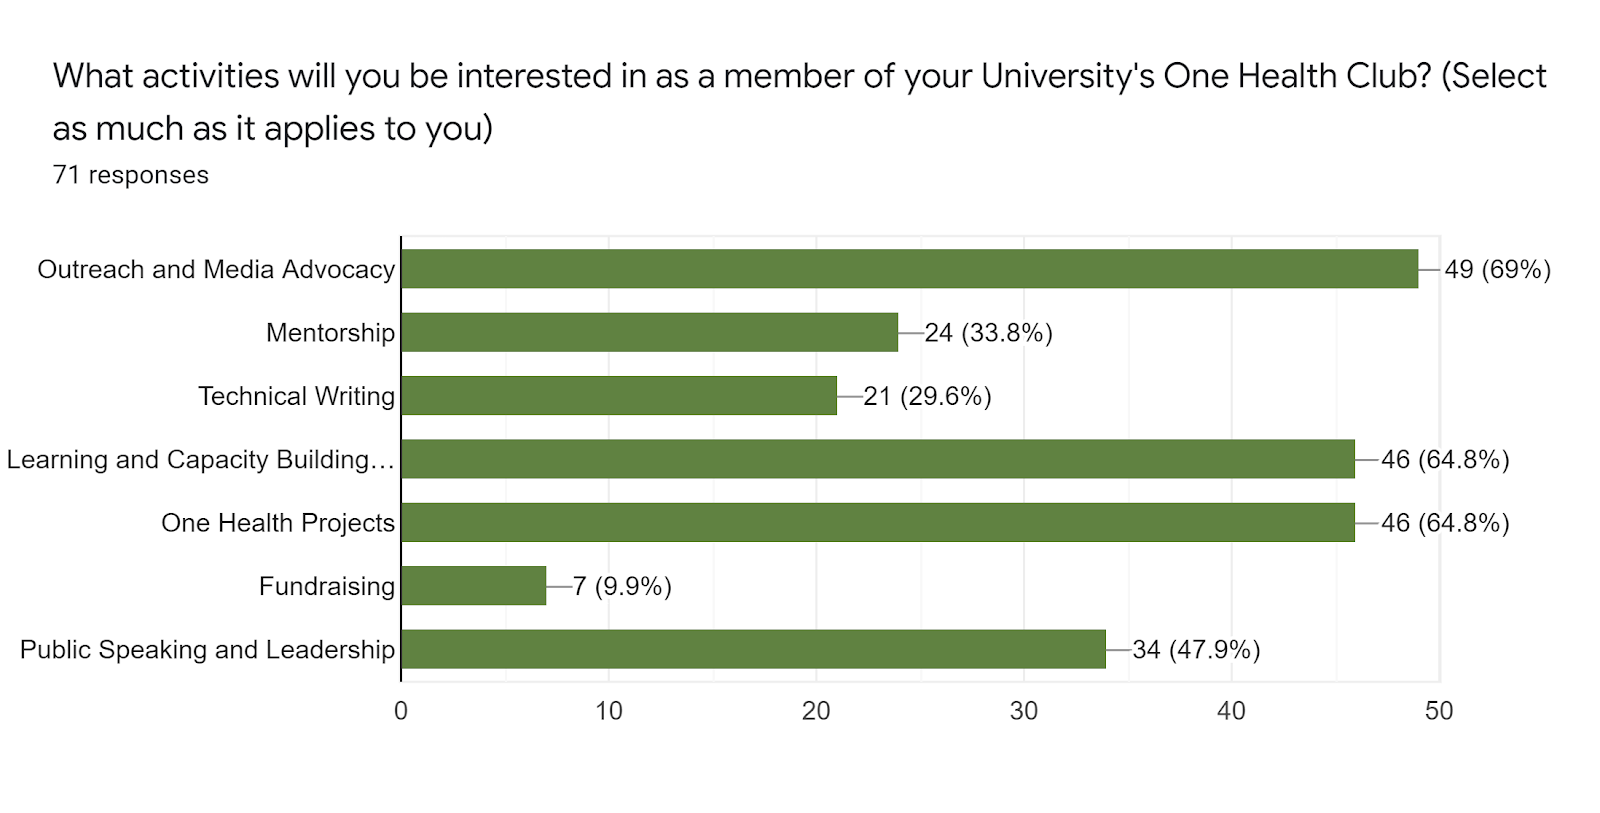 Forms response chart. Question title: What activities will you be interested in as a member of your University's One Health Club? (Select as much as it applies to you). Number of responses: 71 responses.